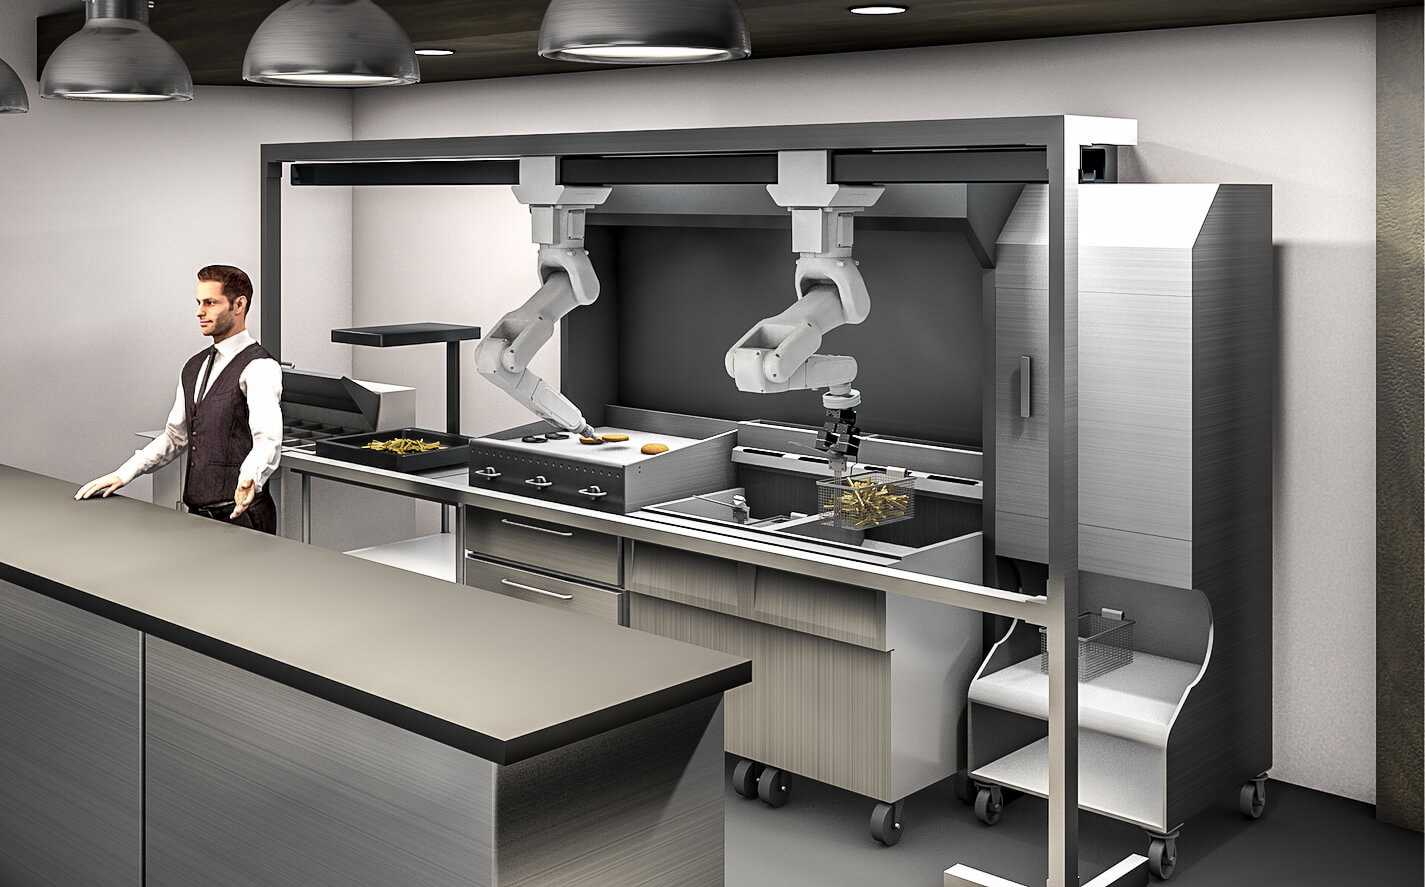 What will the professional kitchen of the future look like? What role will cooking robots play?